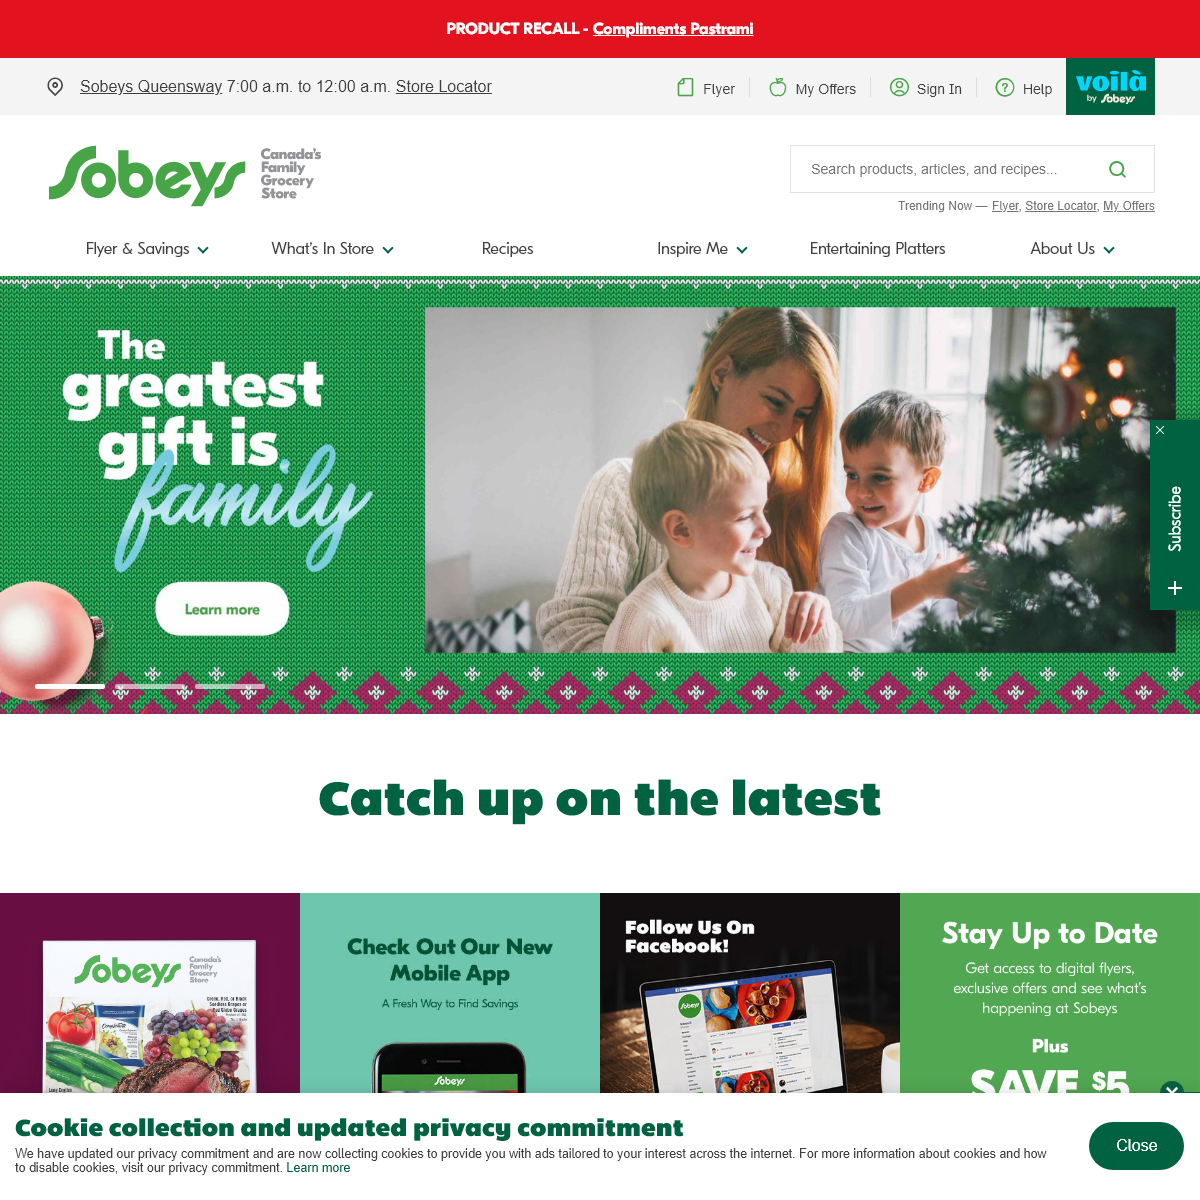 A complete backup of sobeys.com